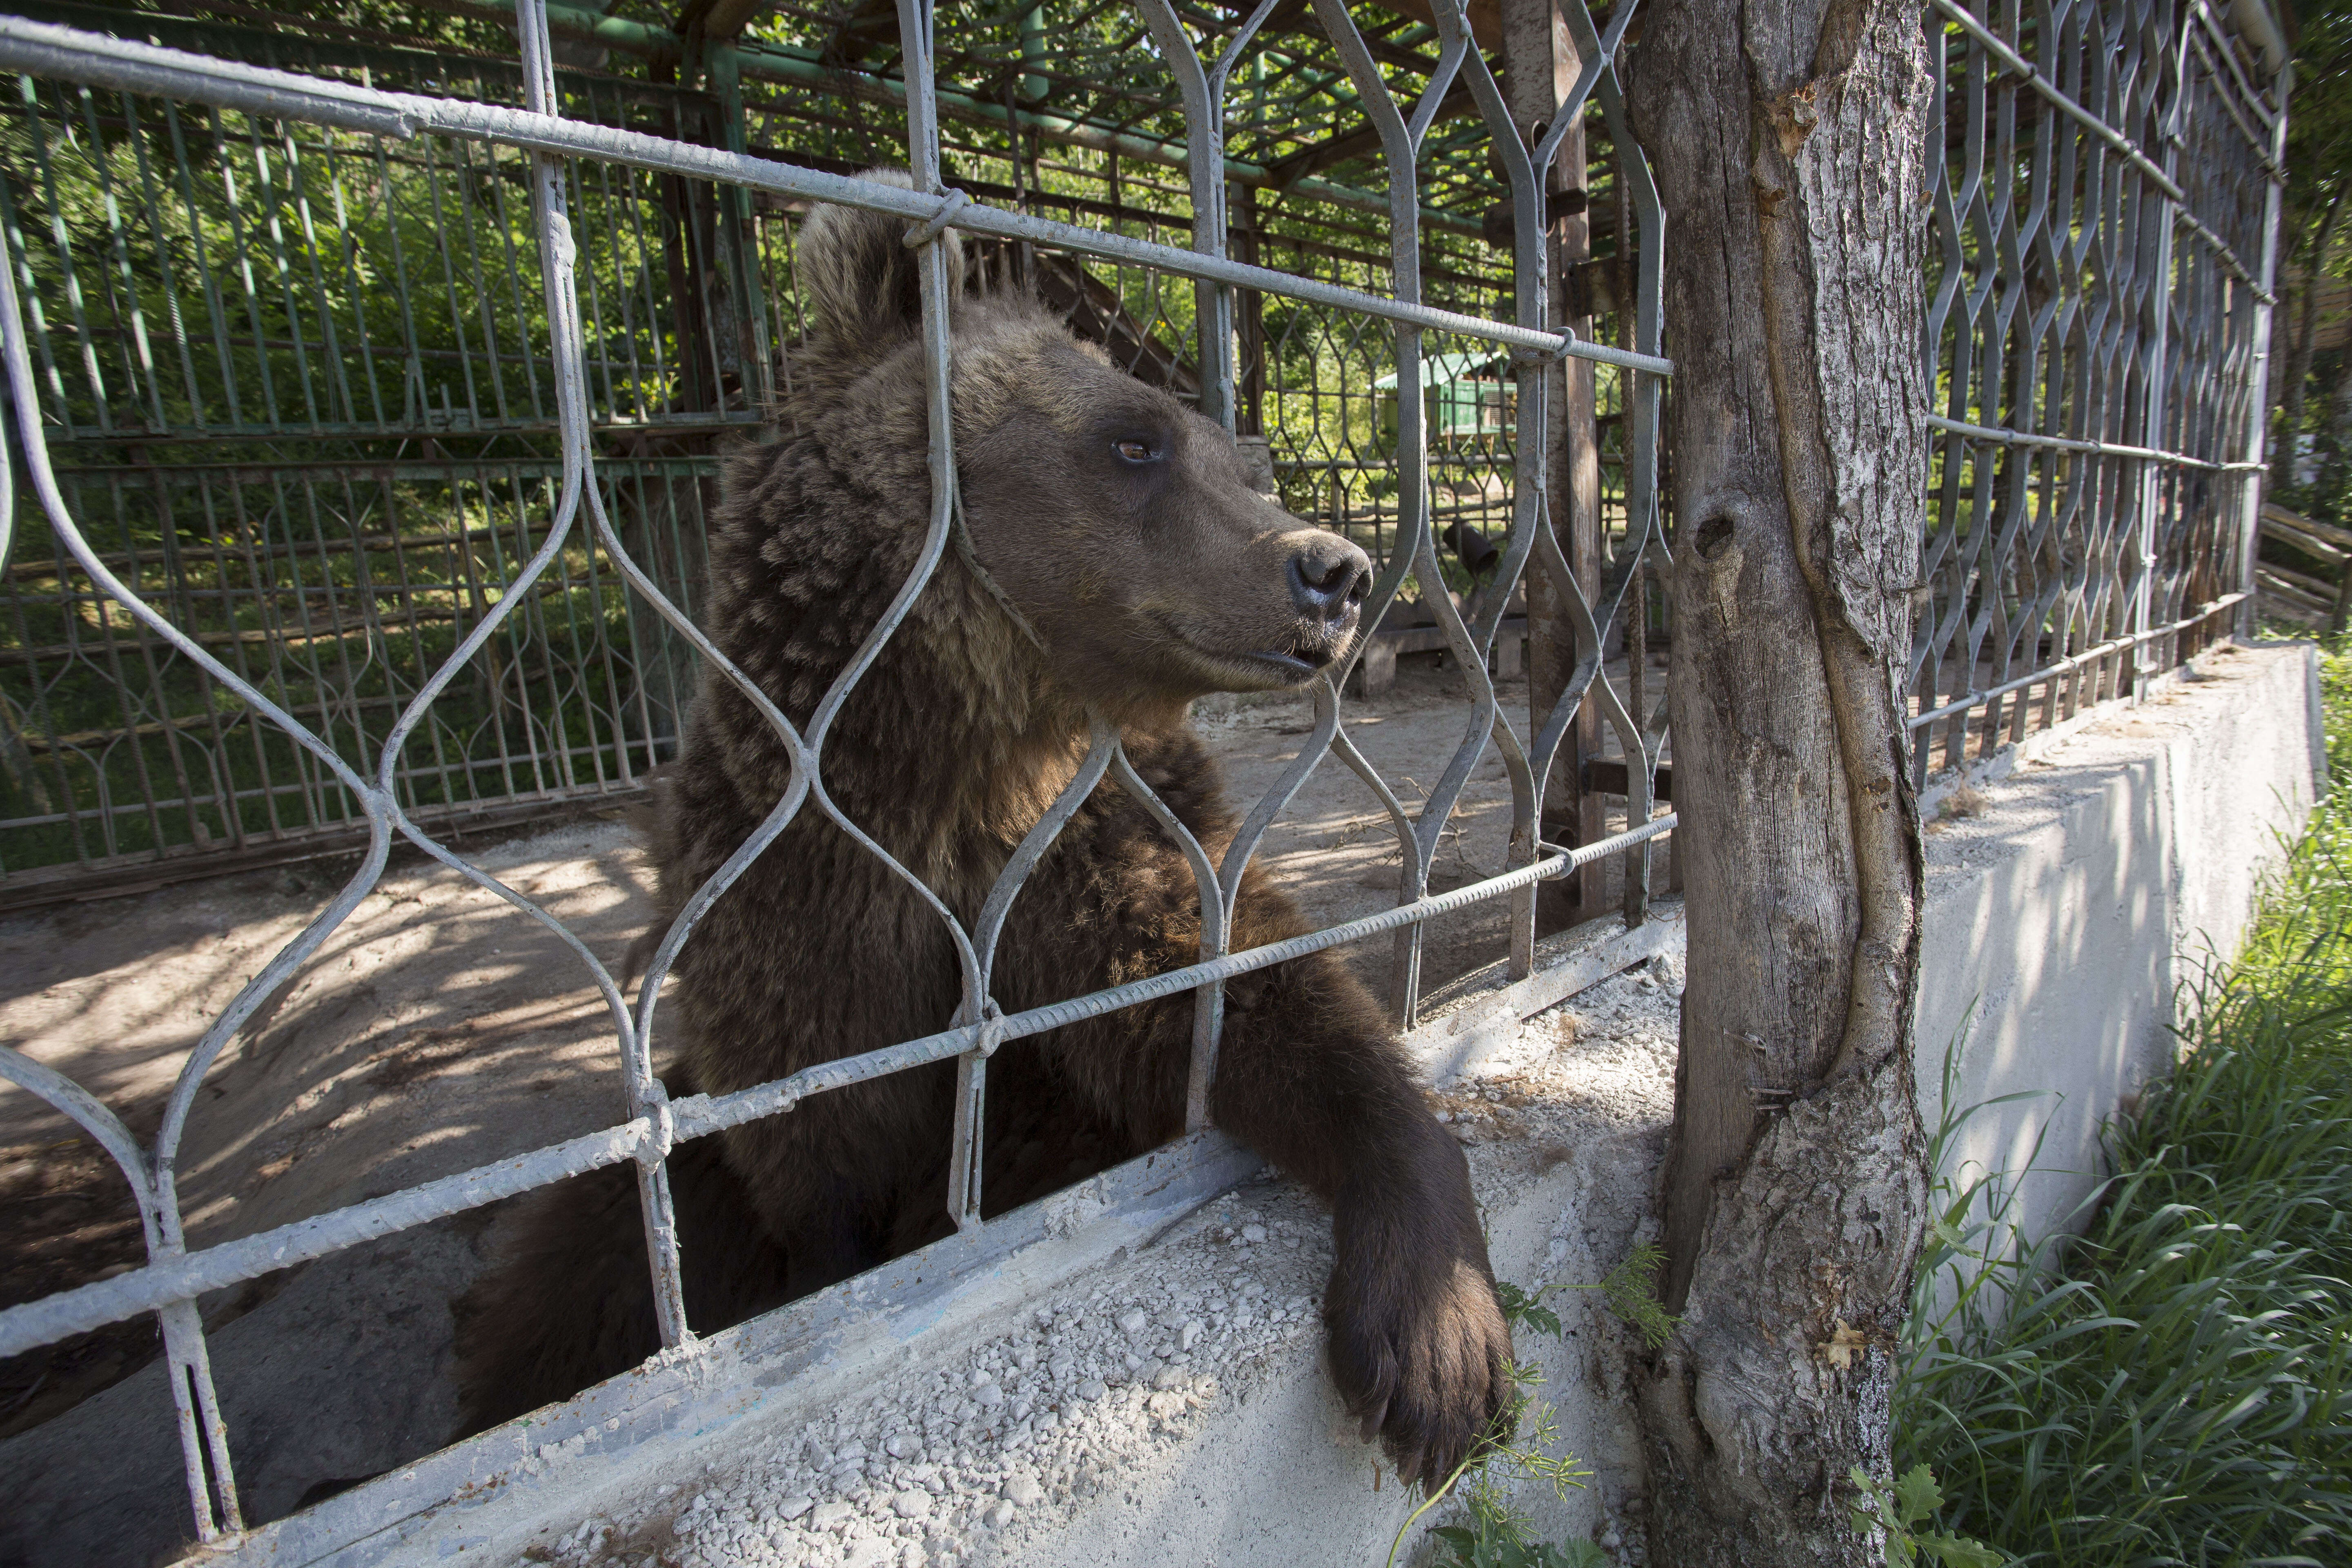 Brown bear peering through the bars of his cage